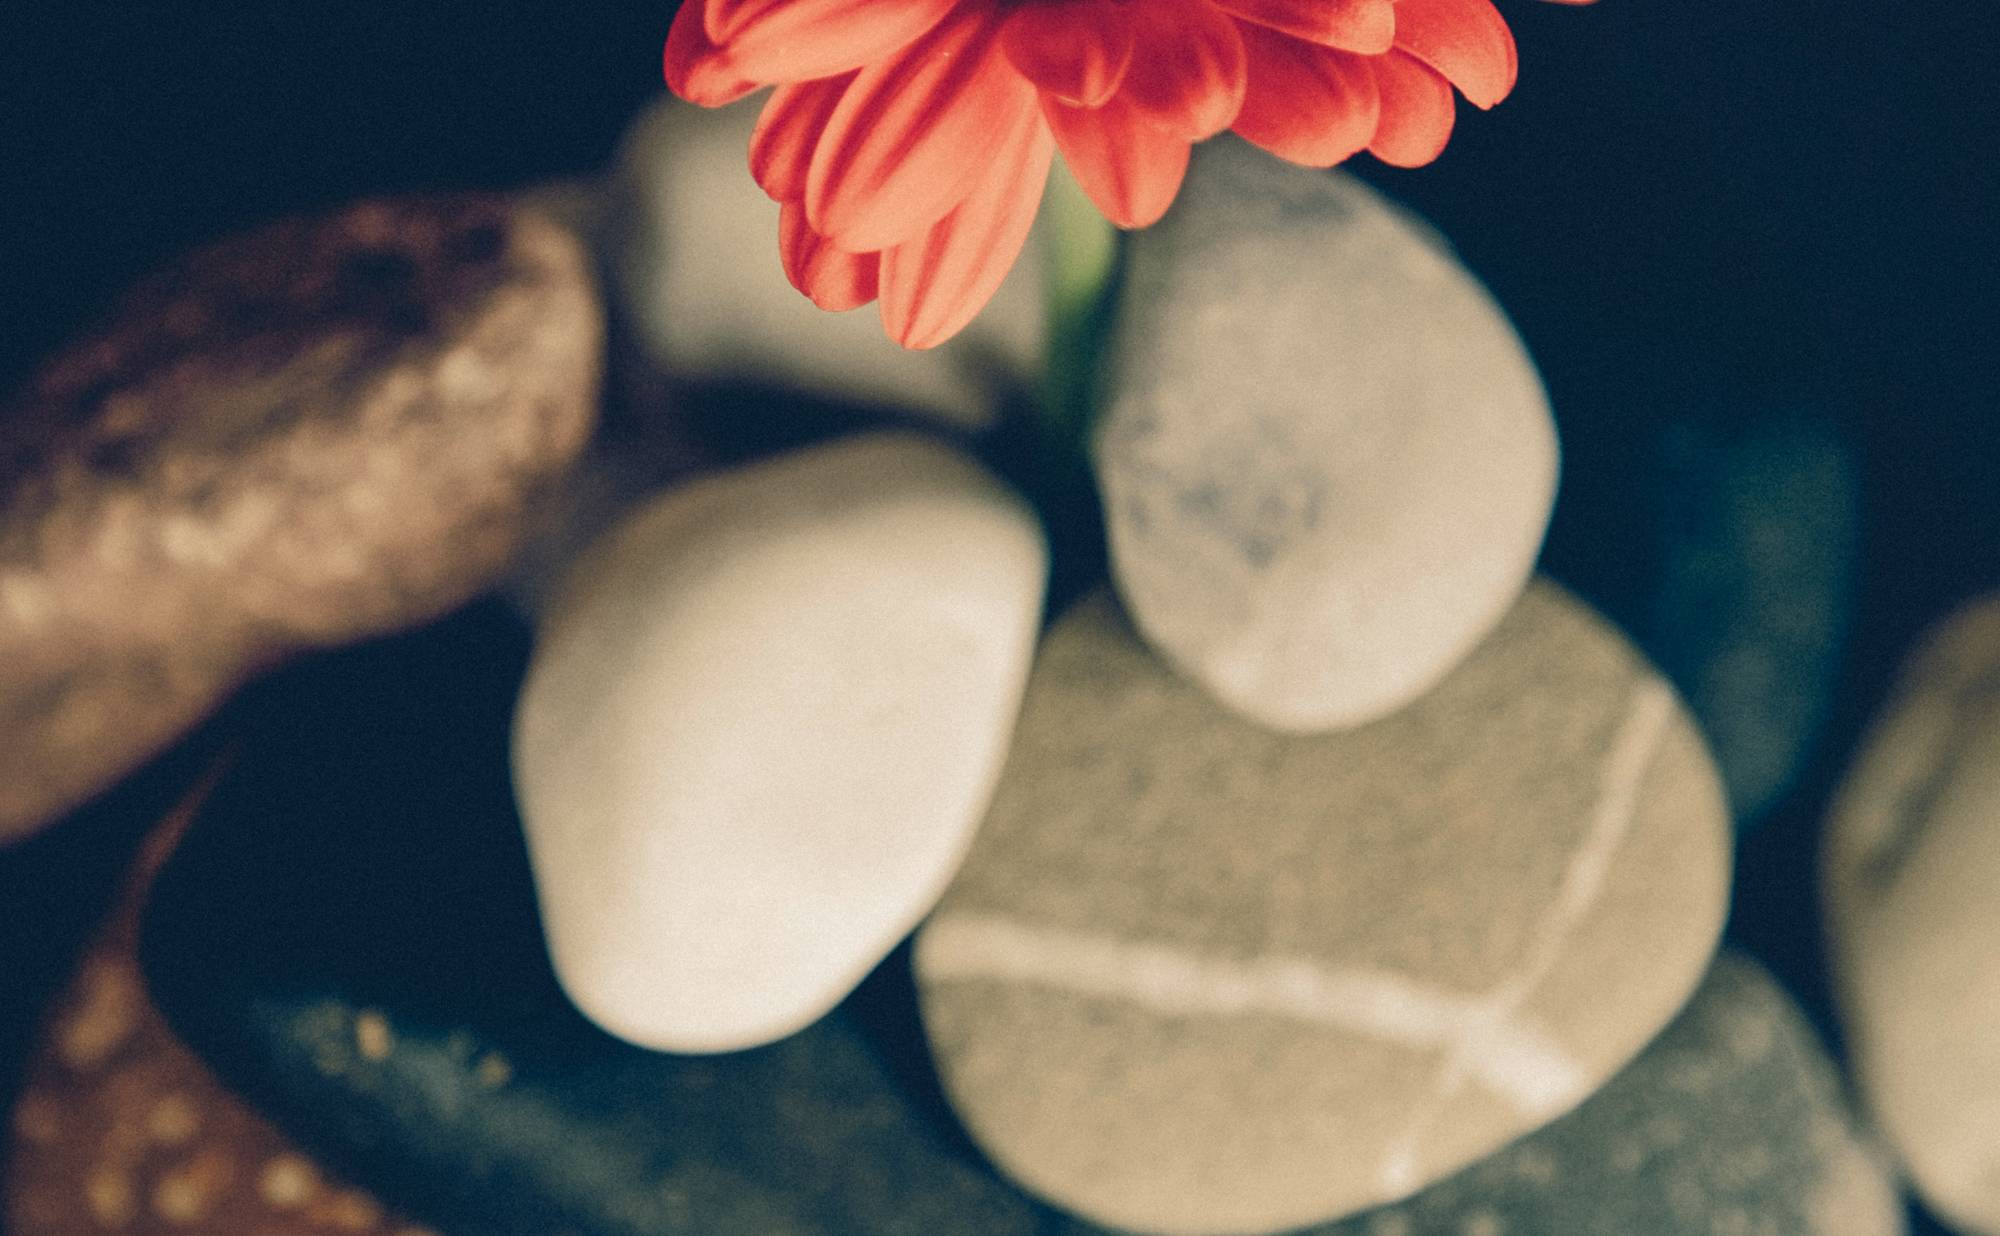 smooth rocks and a red flower